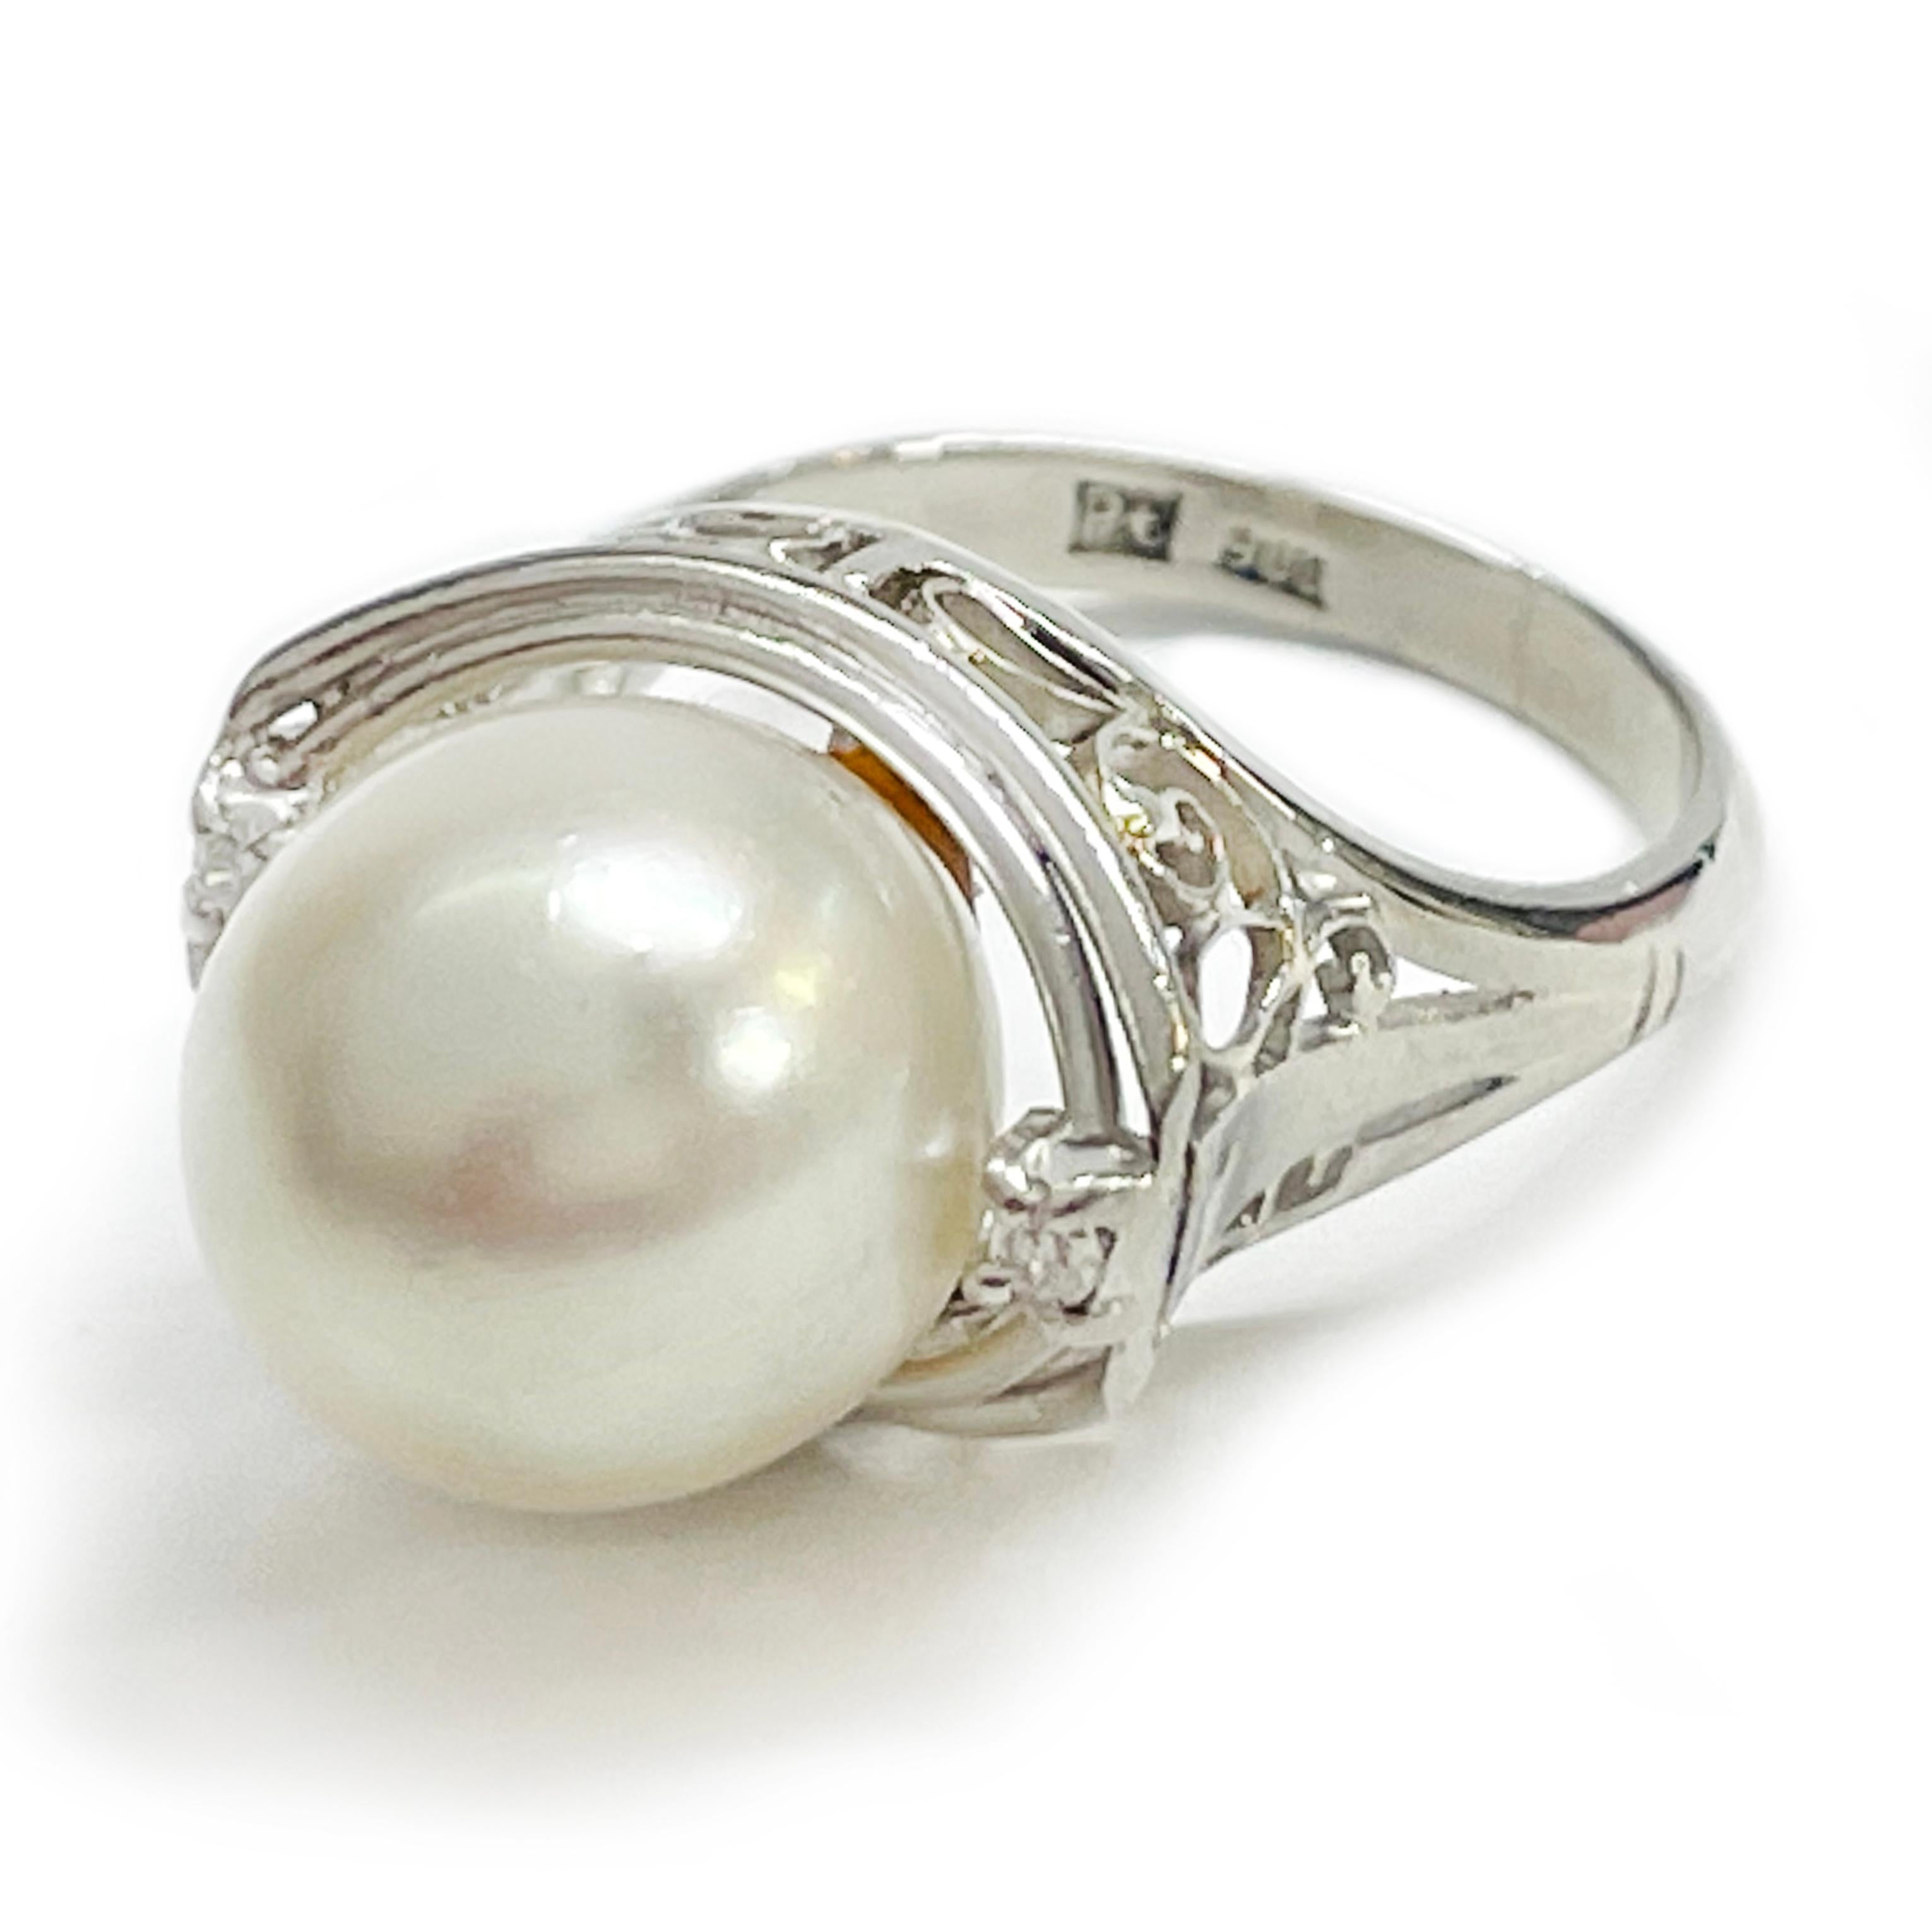 Platinum Pearl Diamond Ring. The ring features a 10mm white Ayoka center pearl flanked by a round melee diamond prong-set on each side. The pearl is white and cream with good luster. The diamonds have a total carat weight of 0.03ct. The ring has a